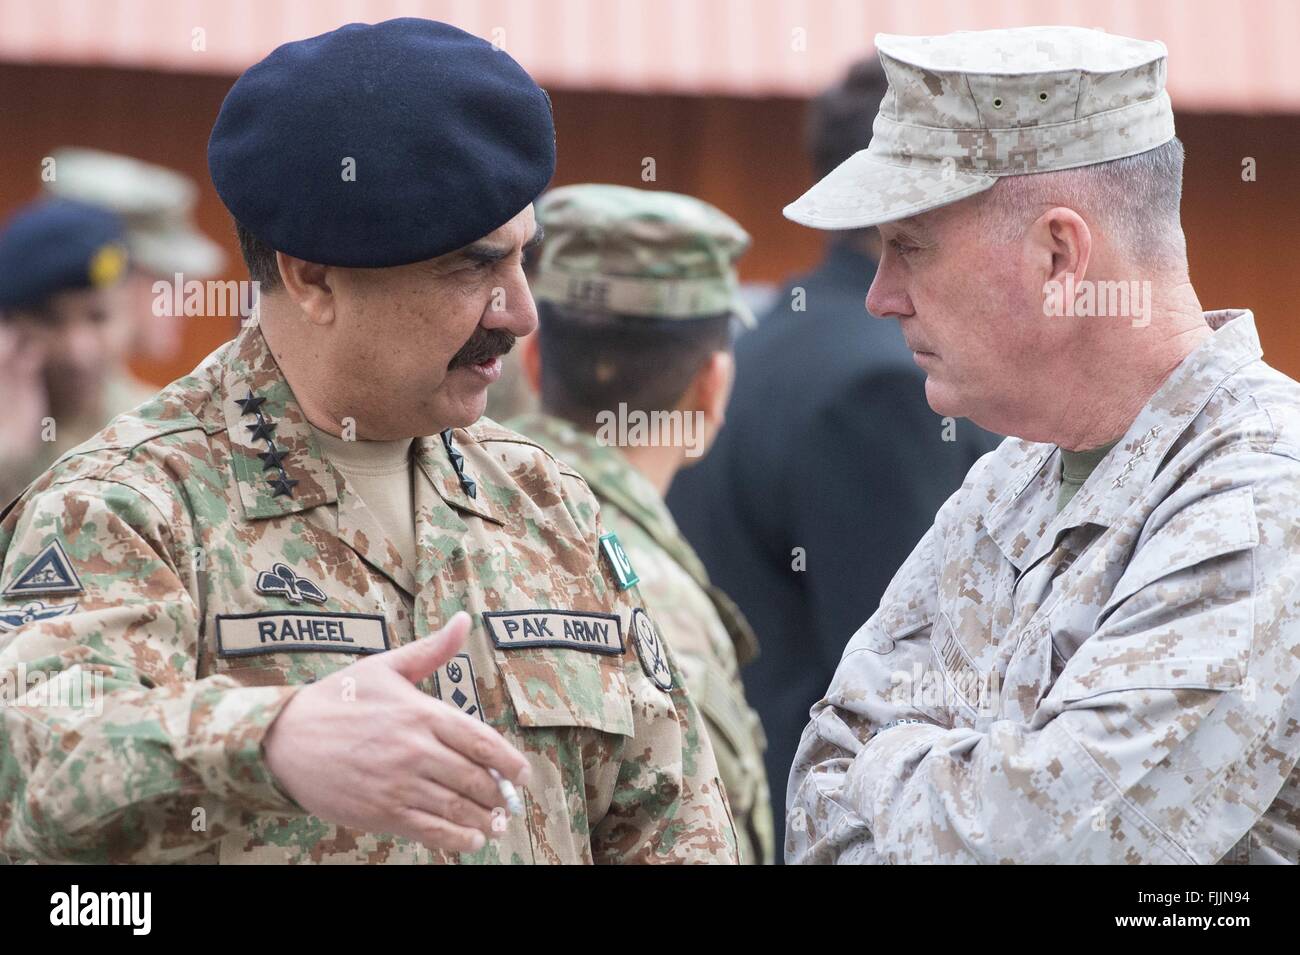 U.S Joint Chiefs Chairman General Joseph Dunford meets with Pakistani Army Chief of Staff, Gen. Raheel Sharif March 2, 2016 in Kabul, Afghanistan. Dunford is in Afghanistan for the change of command of U.S. Forces. Stock Photo